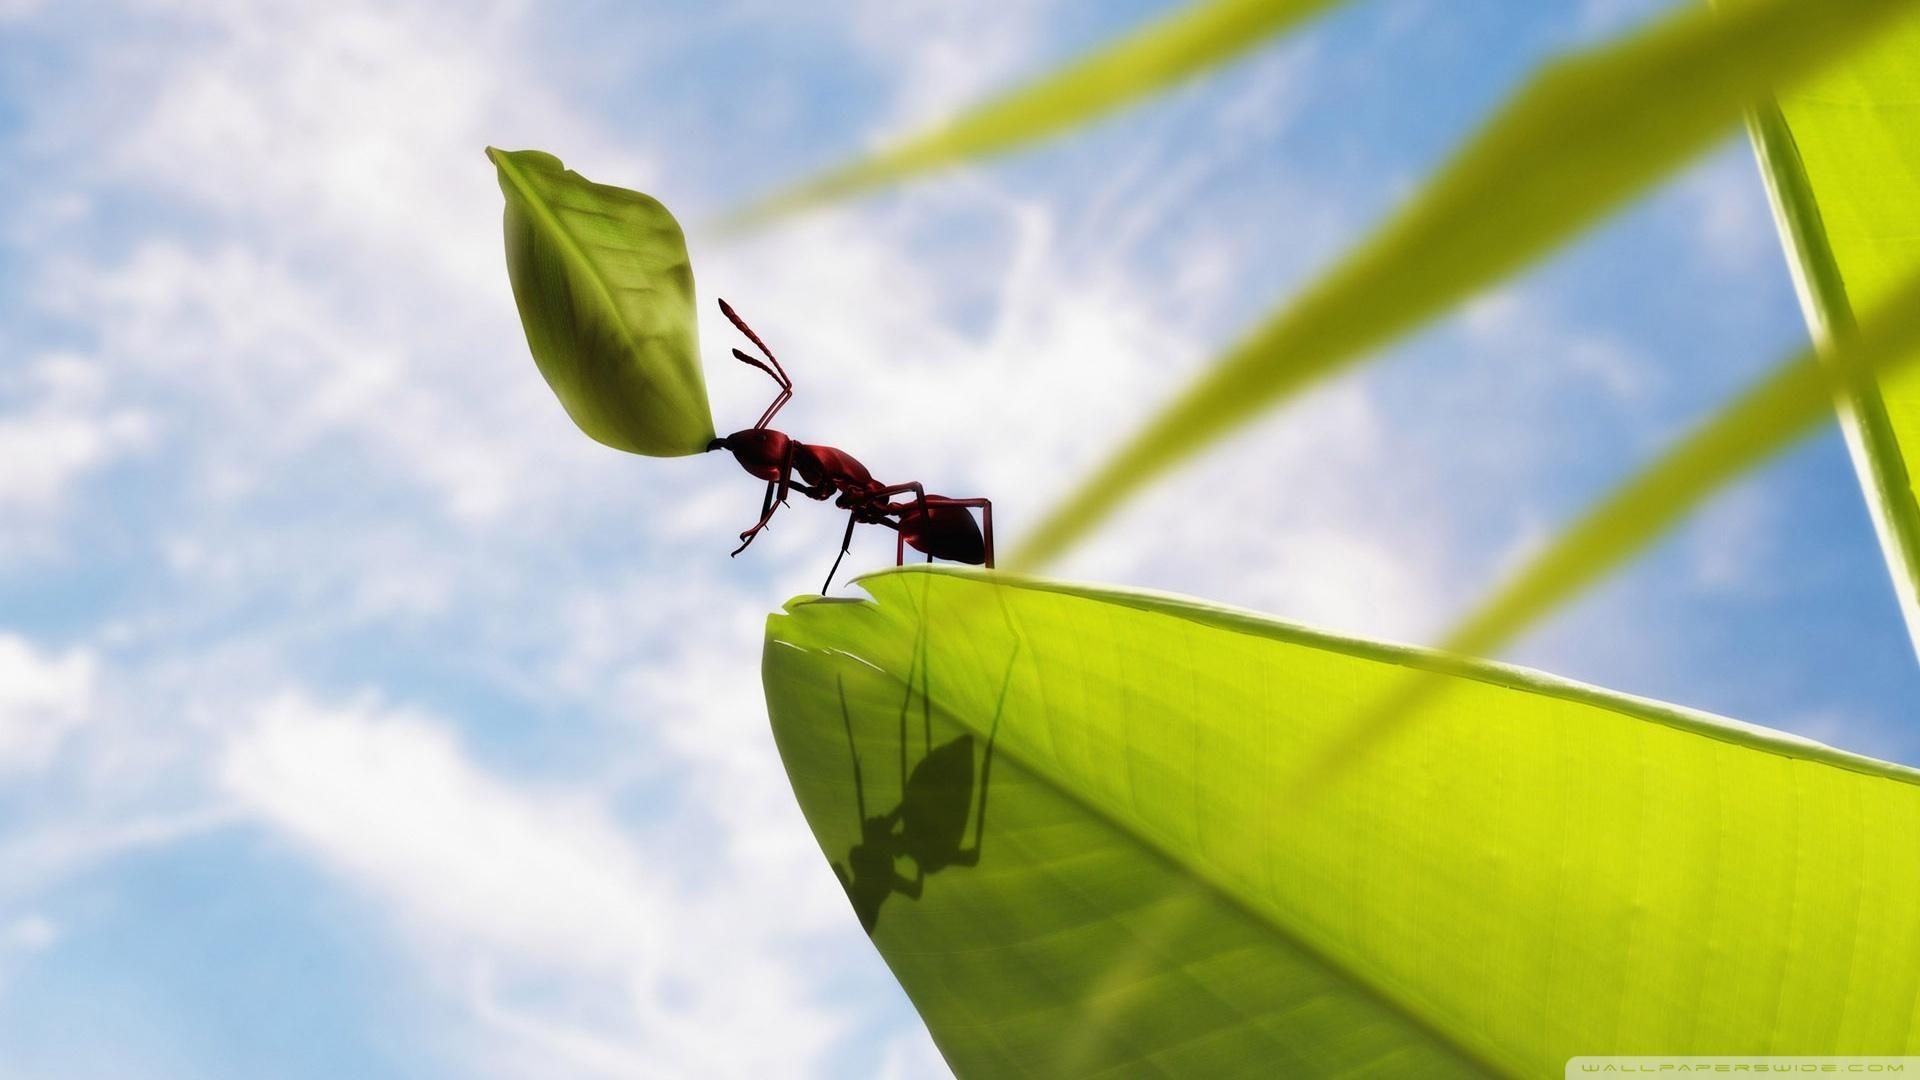 Ant Hd Wallpapers For Pc, Ant, Animal